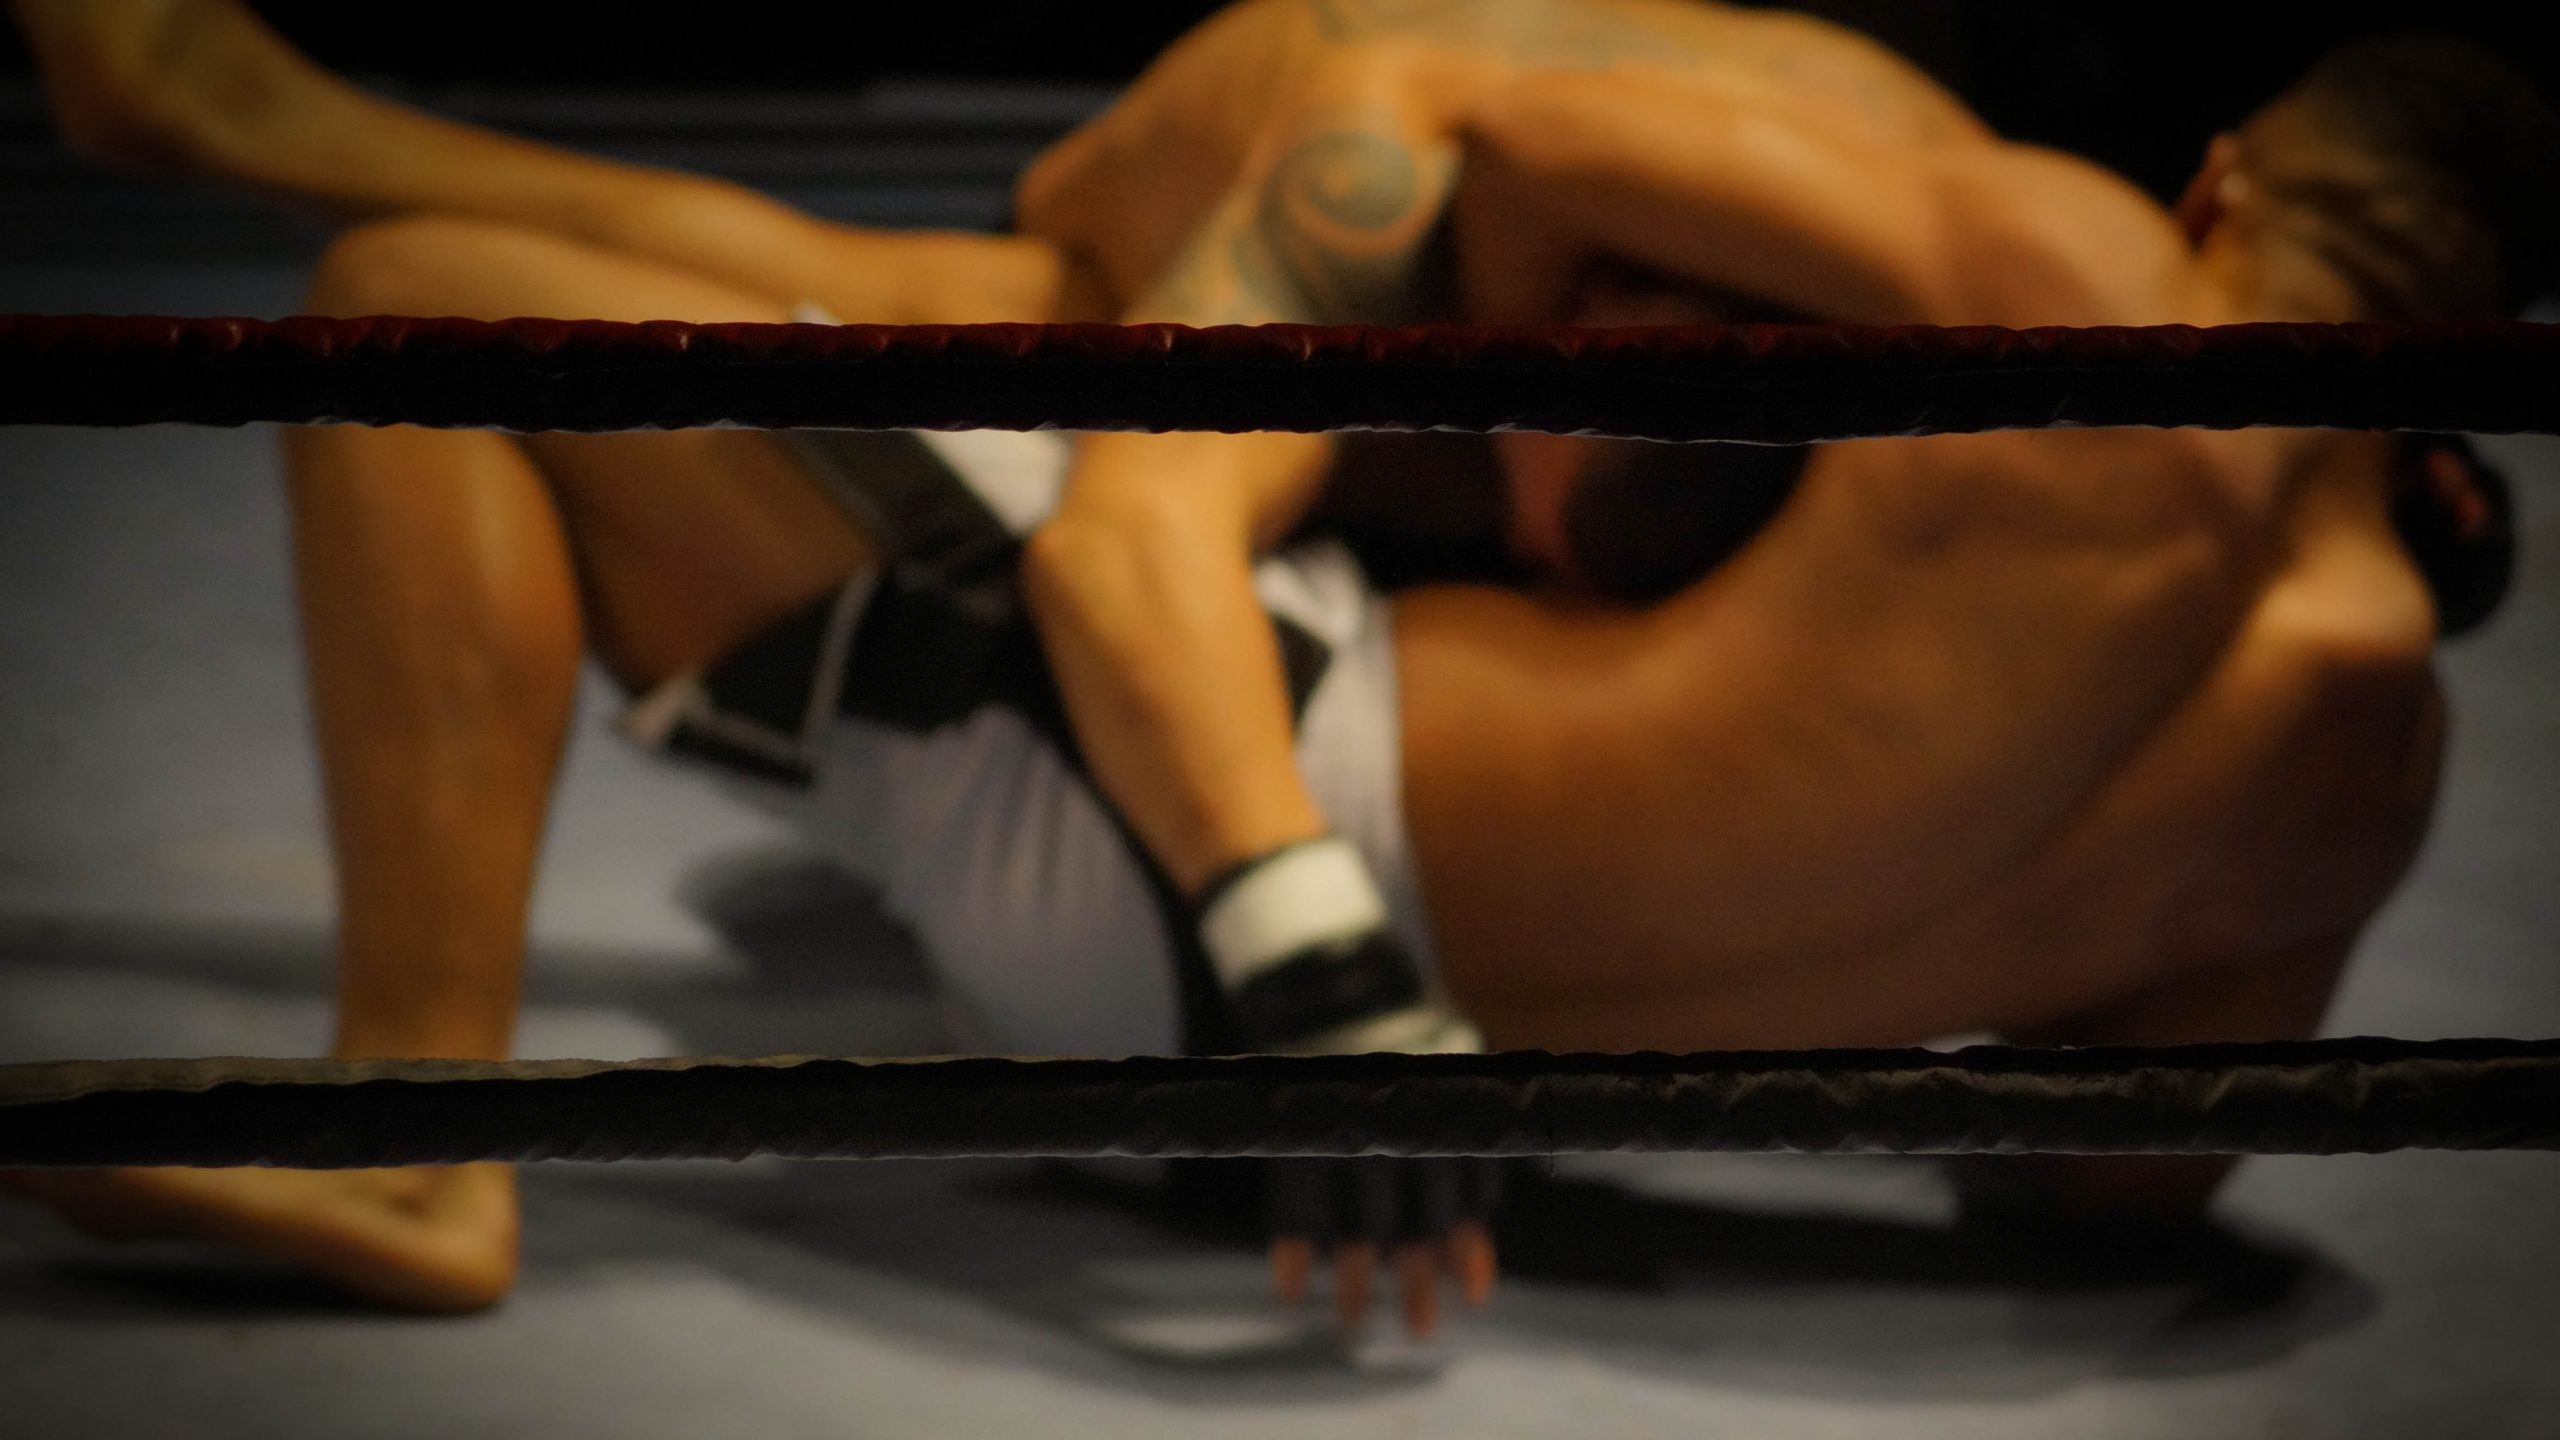 Wrestling Injuries and How to Prevent Them